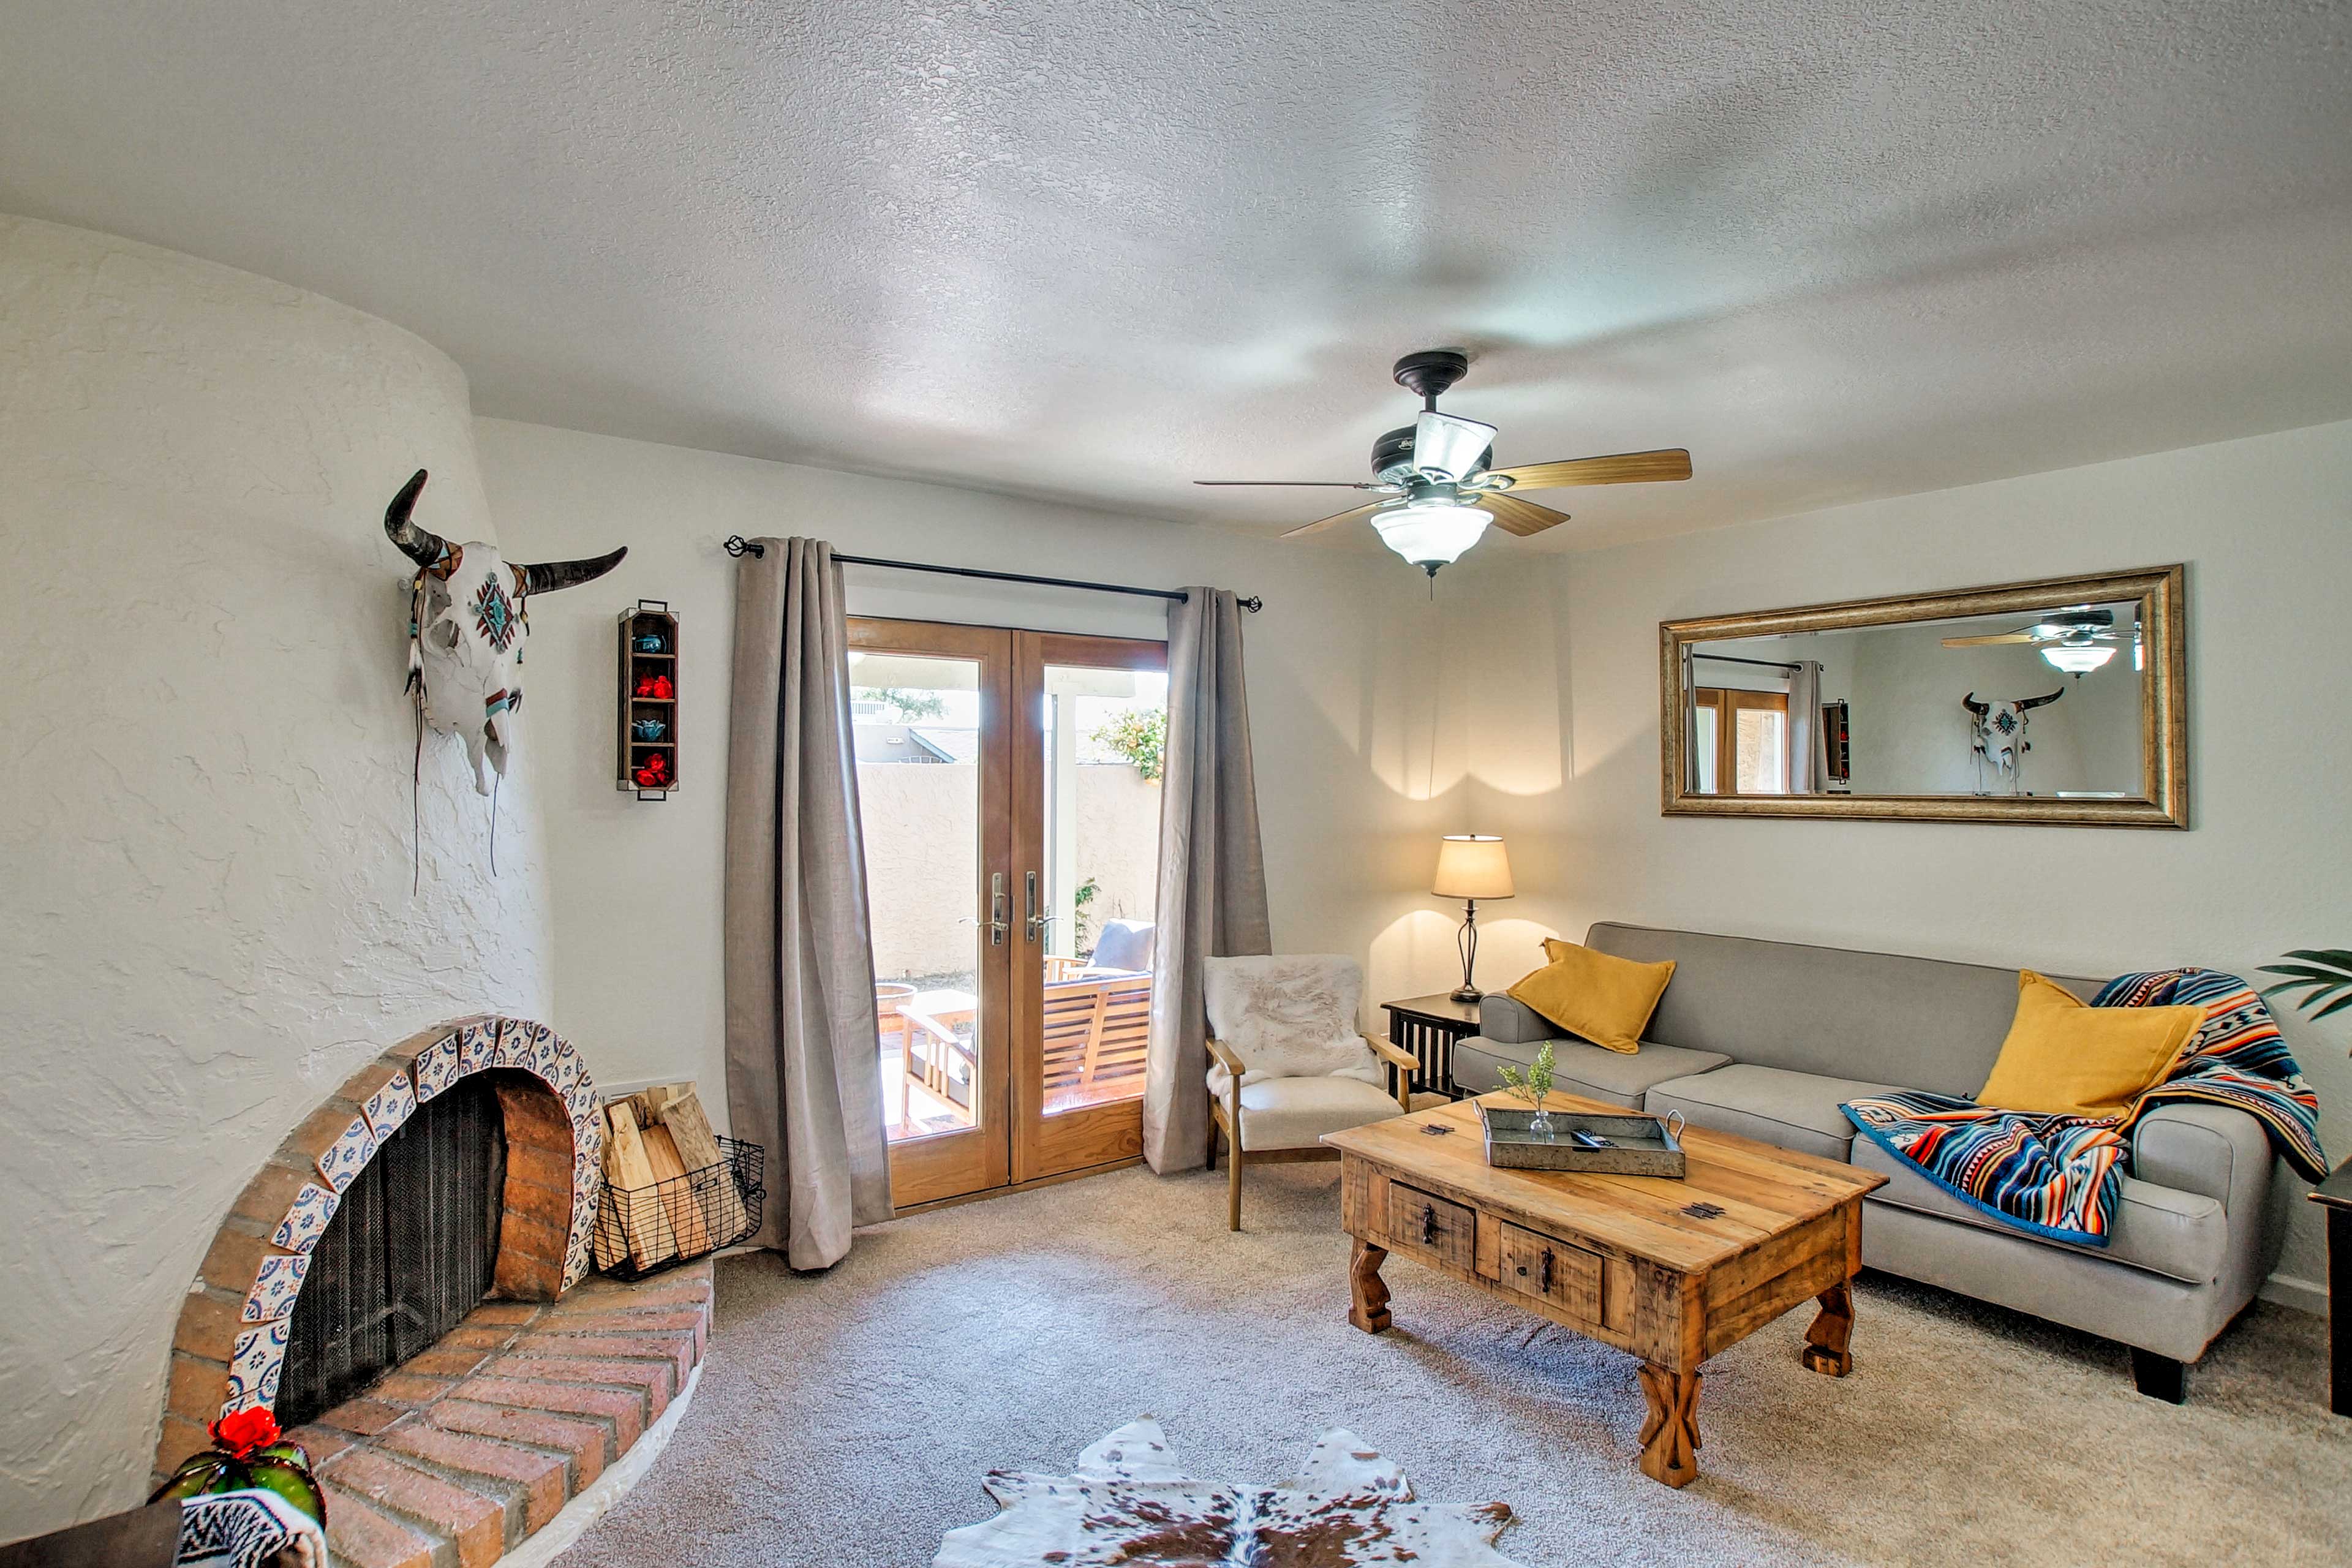 Cozy up to the Kiva fireplace and warm up.